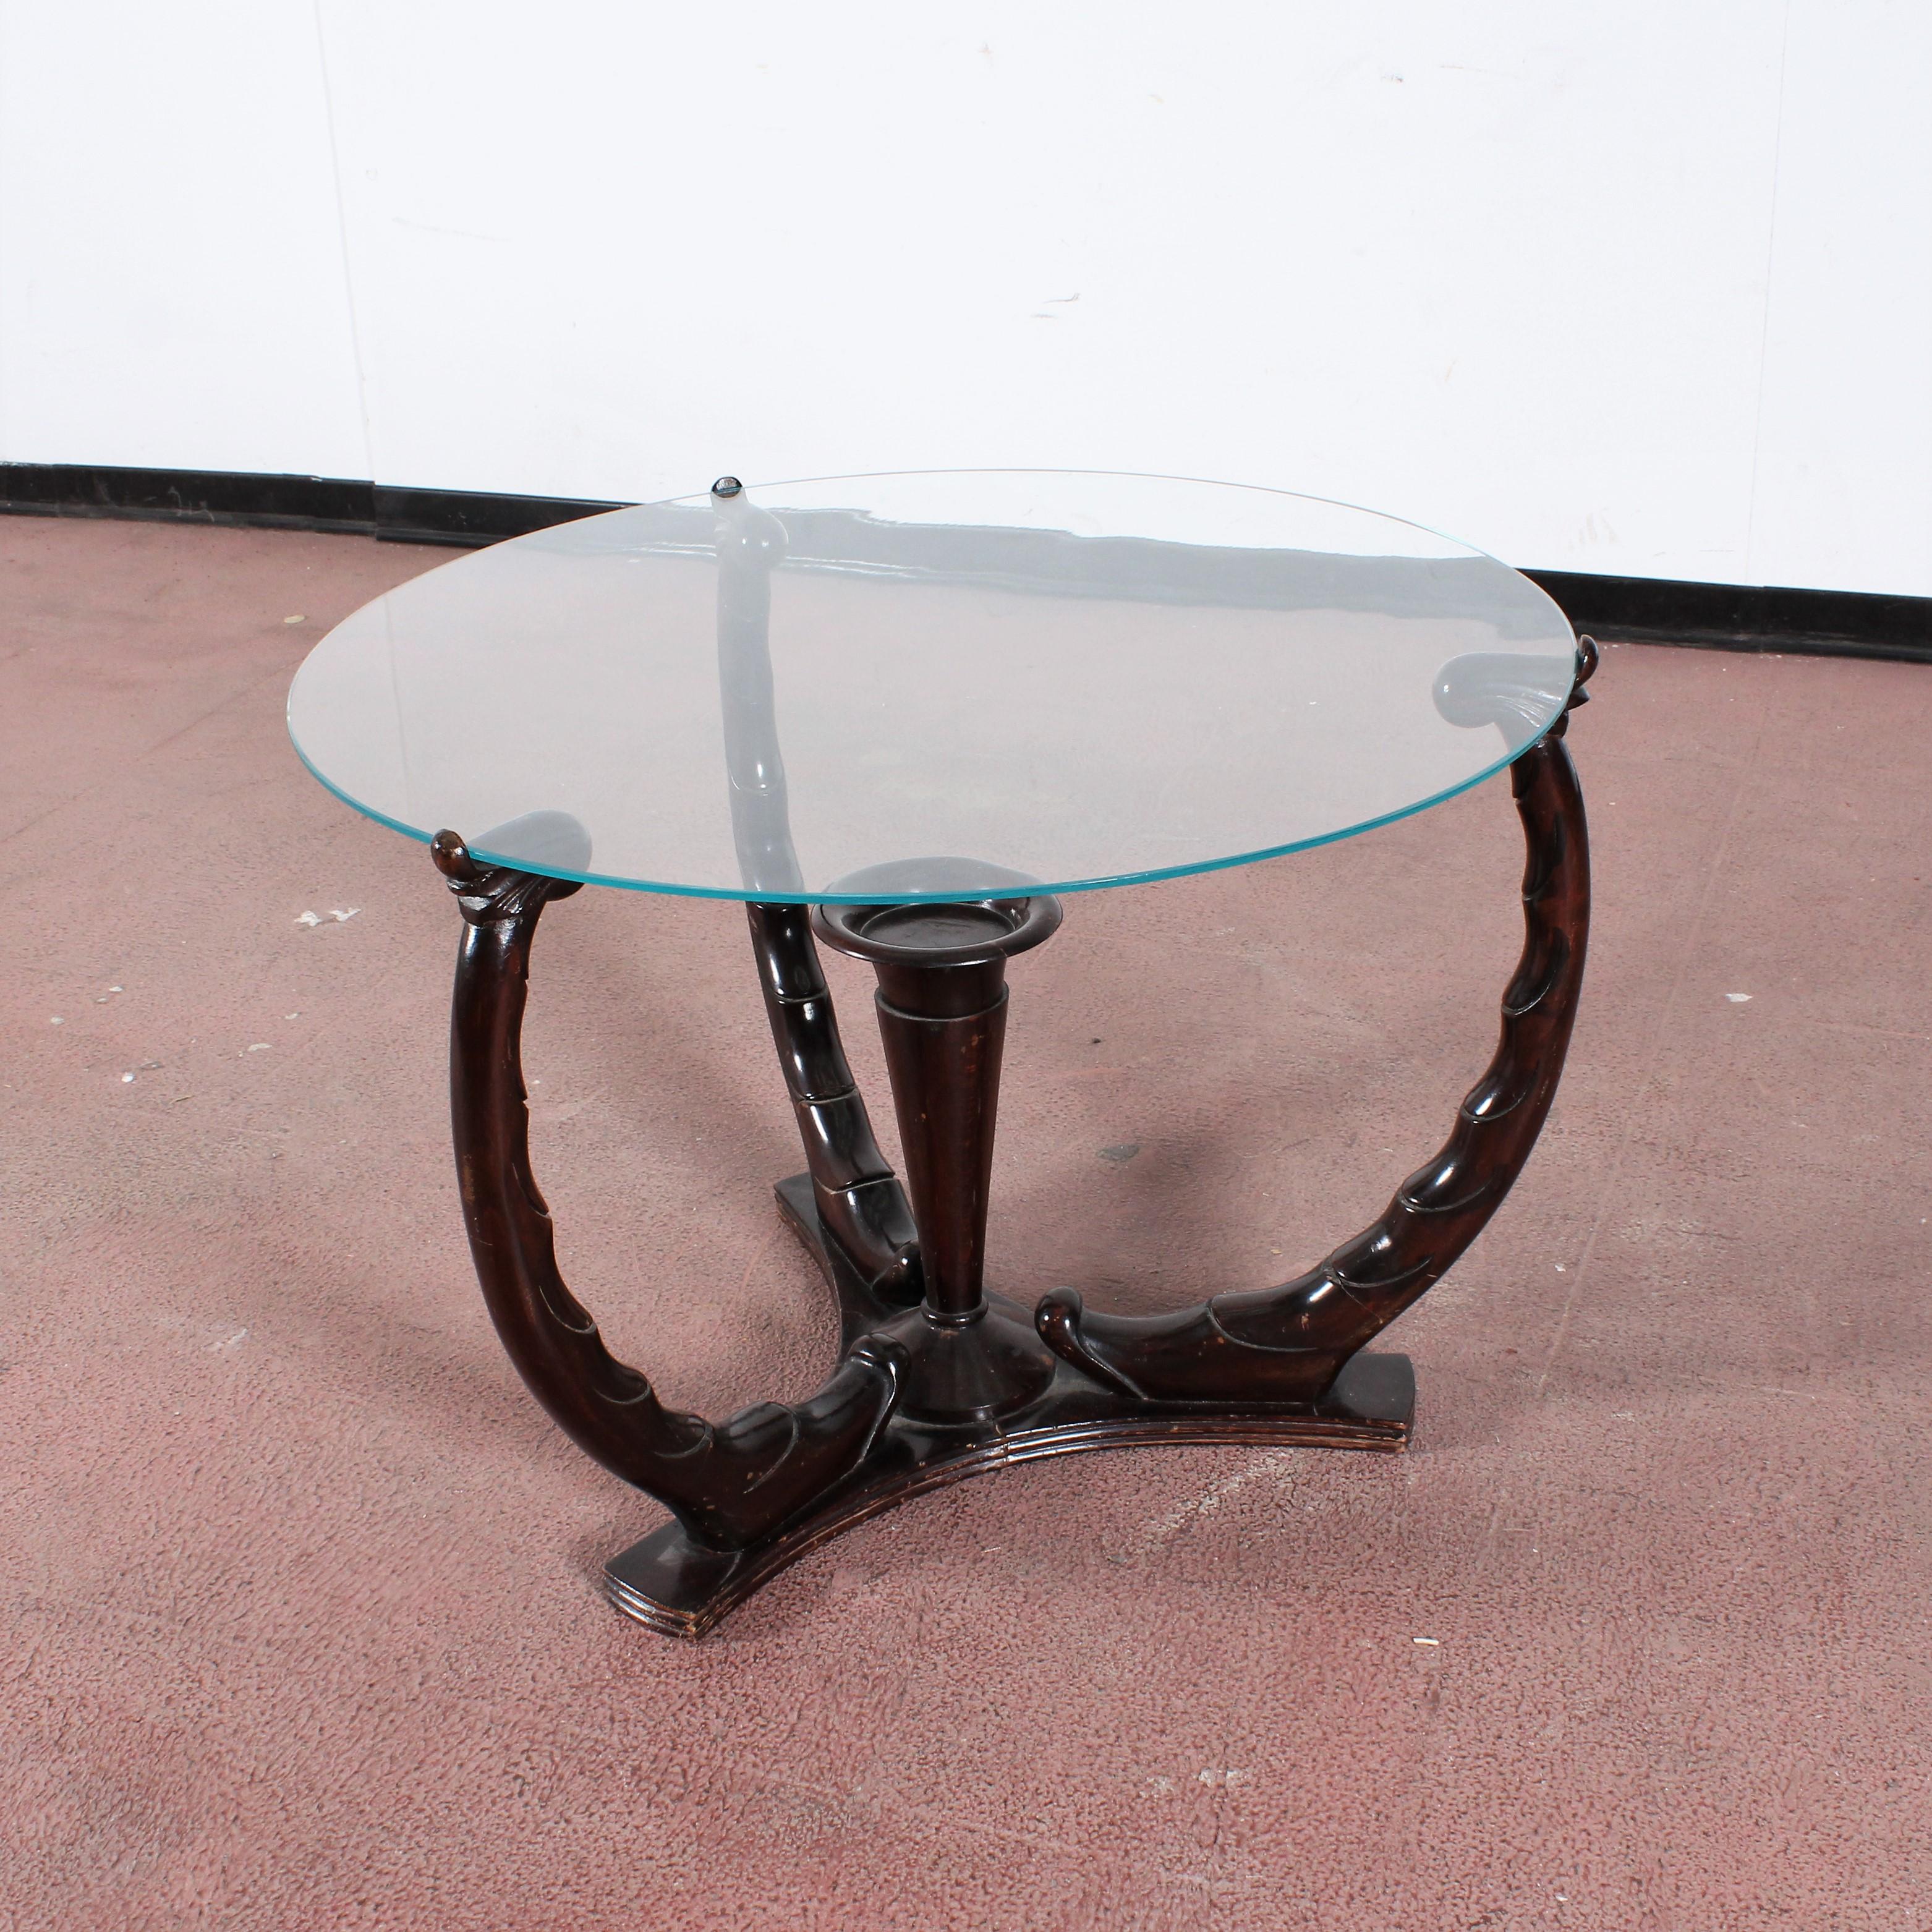 Very beautiful wood round coffee table with clear glass top.
The three elegant legs and the central body, in dark wood with intertwining motifs, offer an extraordinary optical effect. Osvaldo Borsani style, 1950s, Italy.
Wear consistent with age